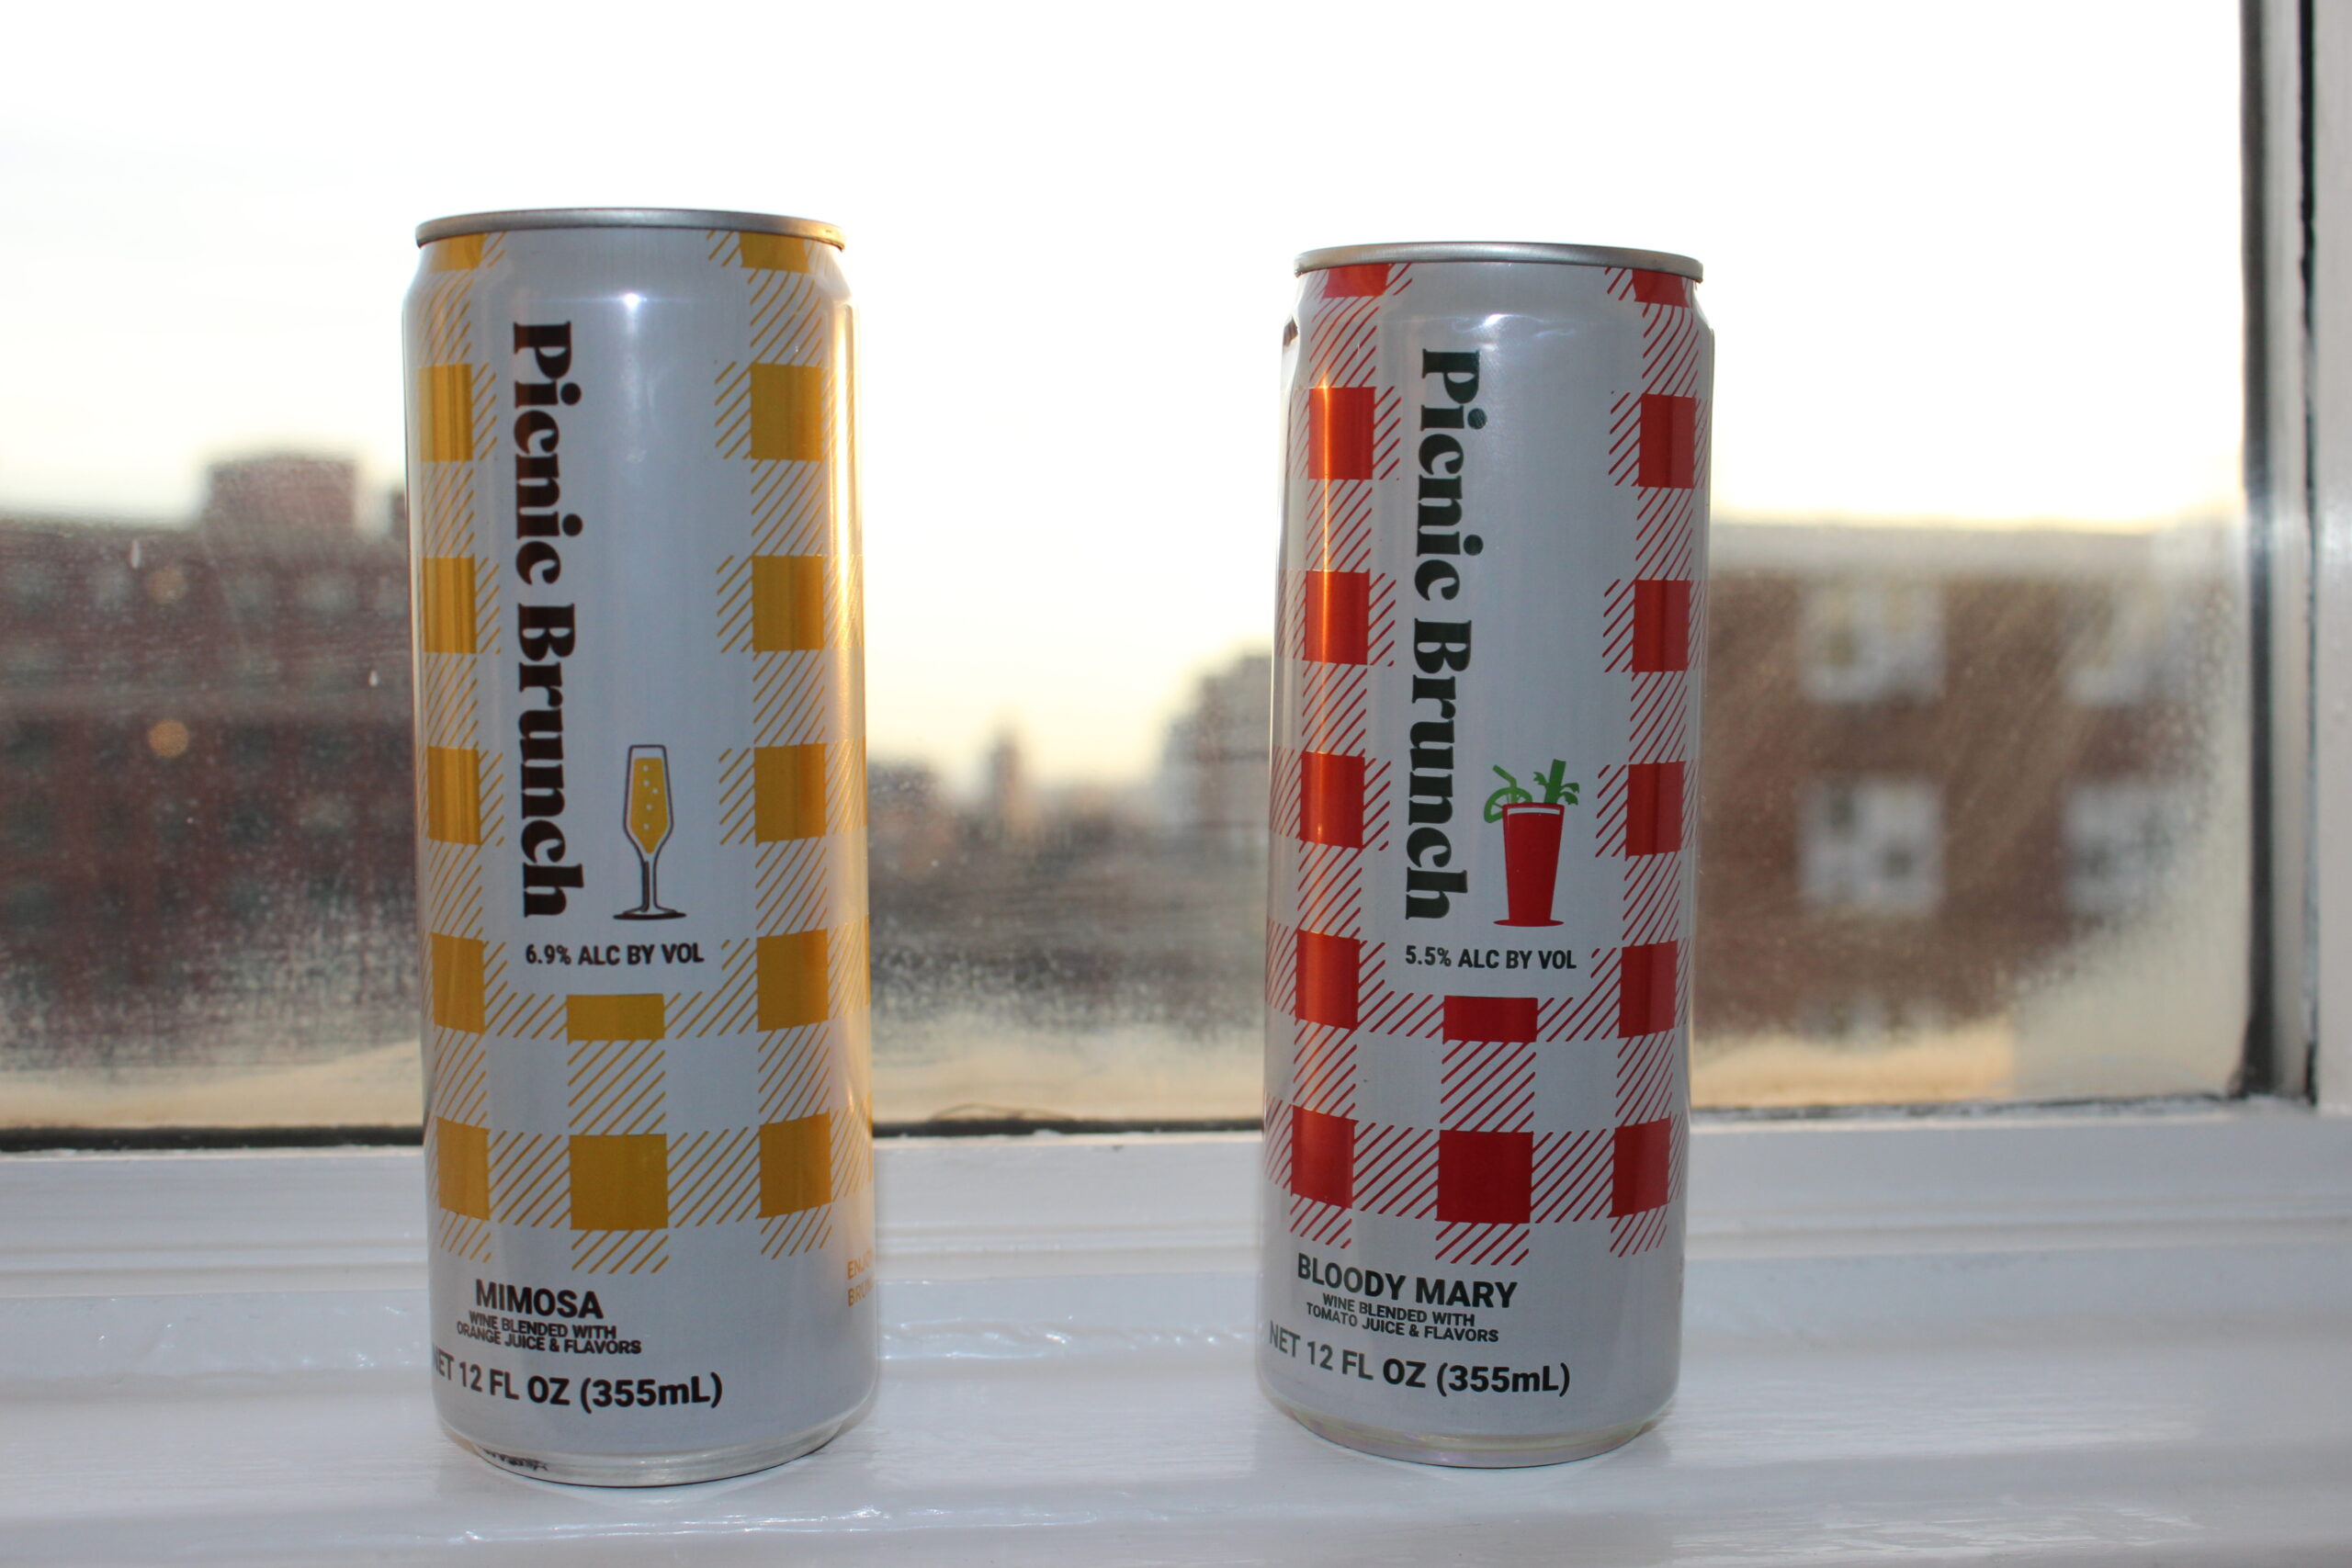 Picnic Brunch Launches Canned Mimosa and Bloody Mary